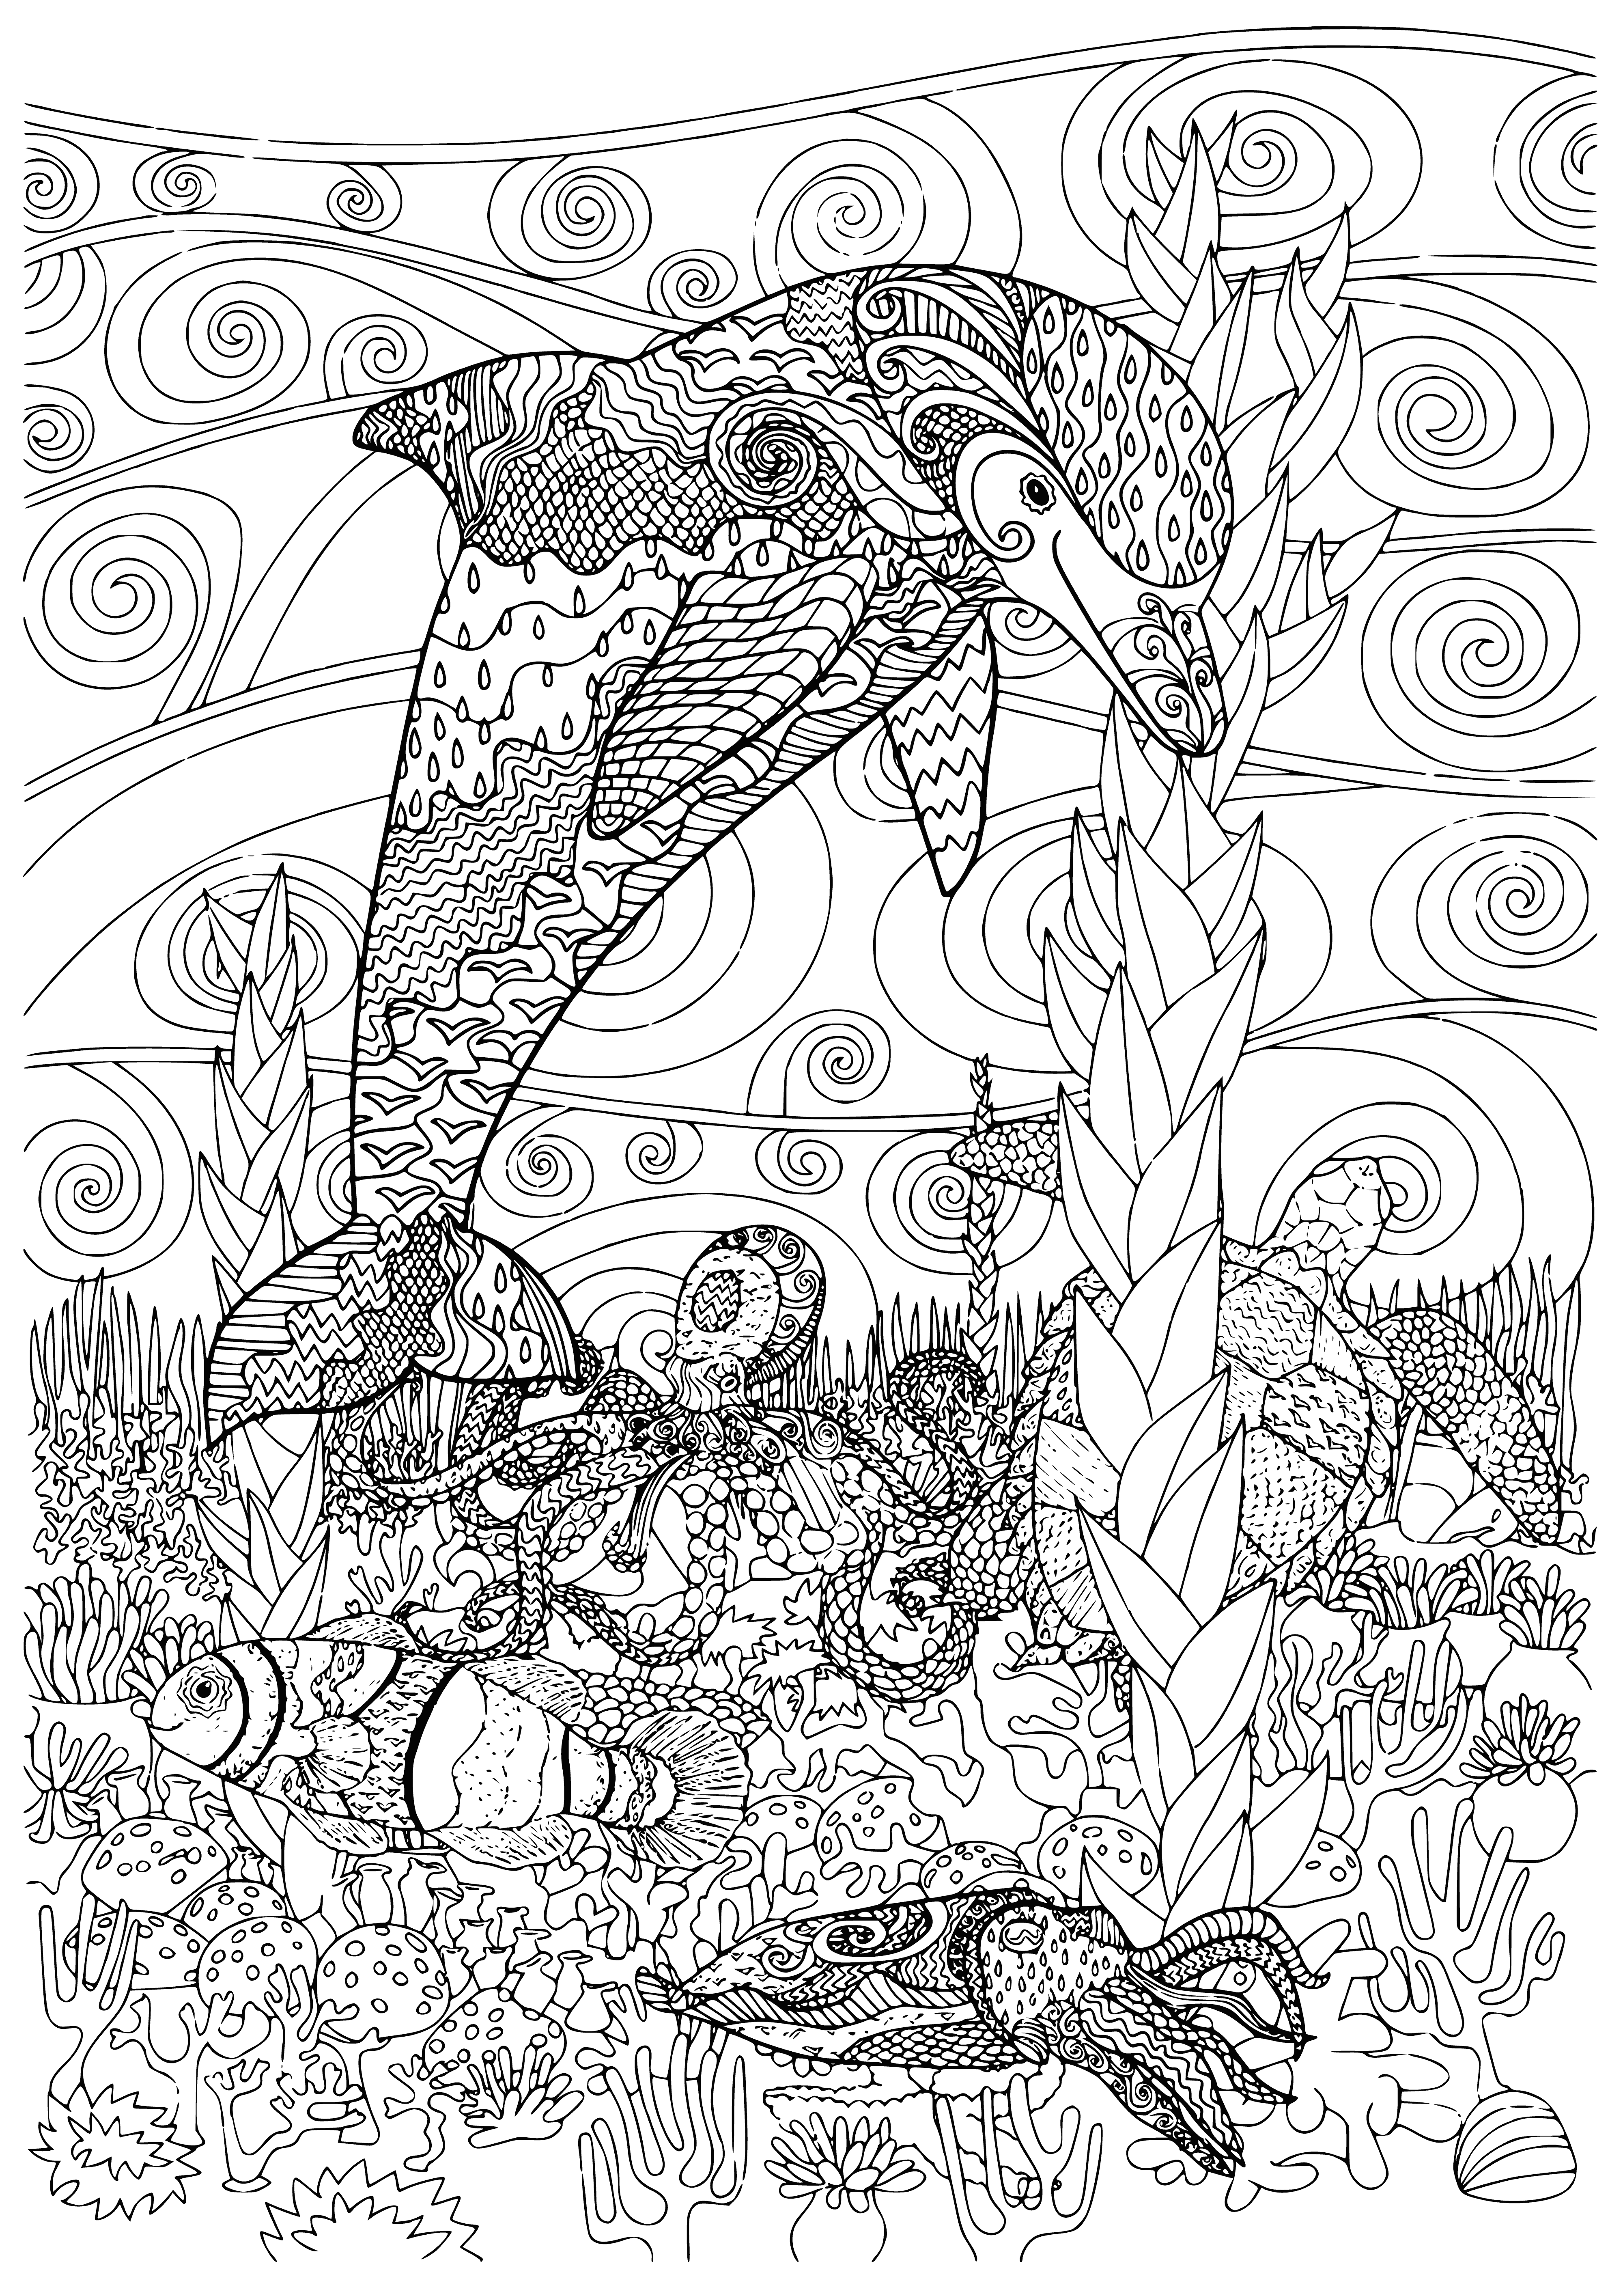 coloring page: A gray and white dolphin swims through a sea of colorful fish, free and happy.